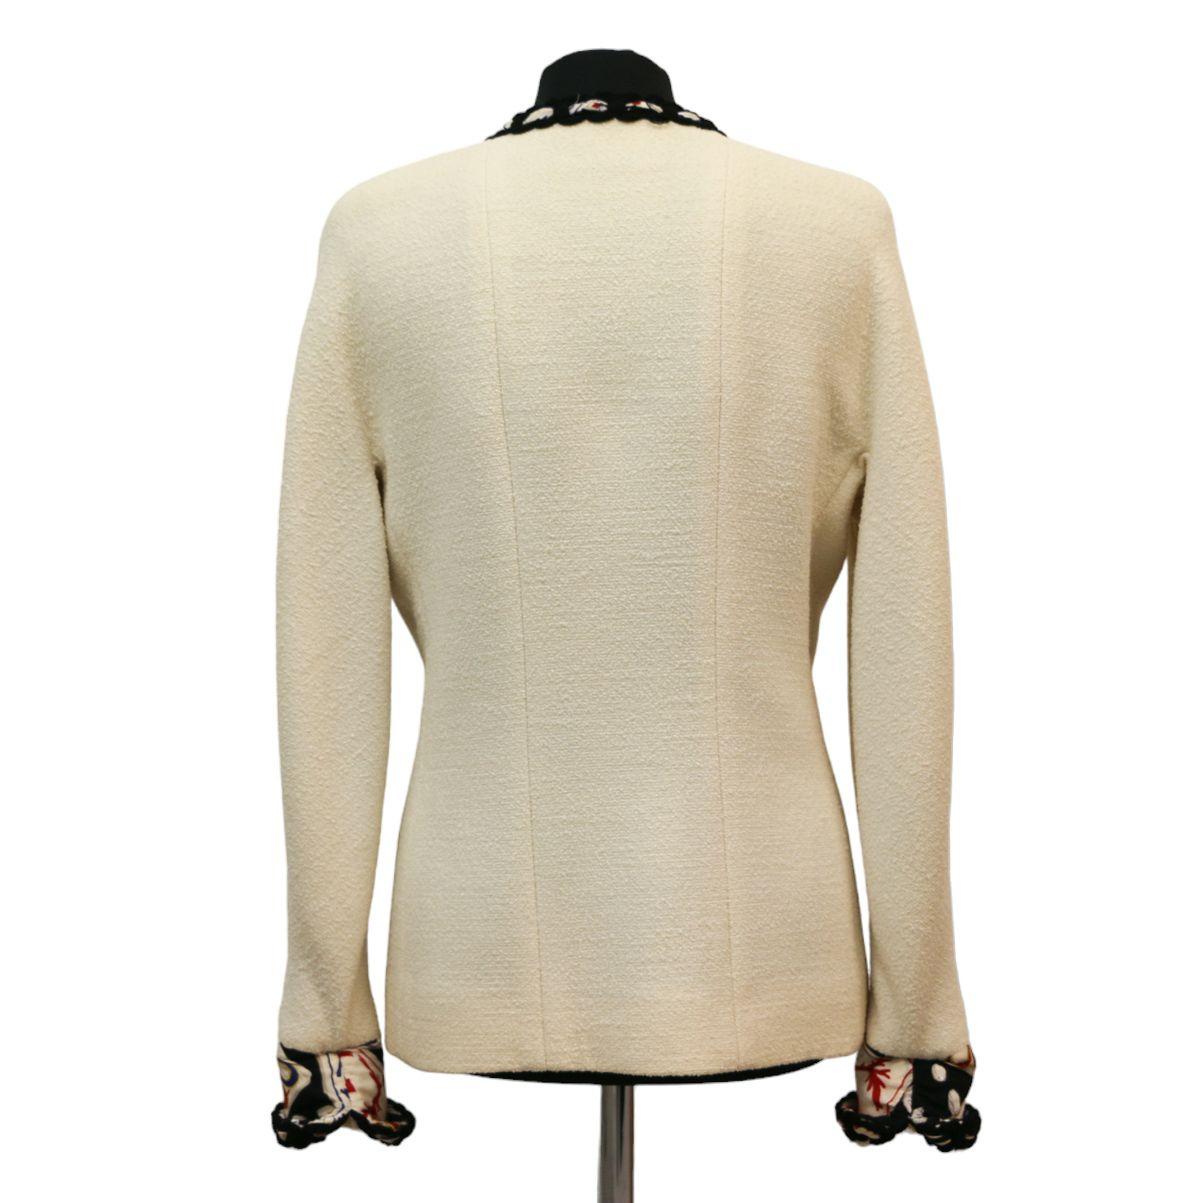 Wonderful VINTAGE Chanel jacket from the casino collection of 1989 in size 40 (fr).
Made in France, in tweed, with a silk lining ; in the colors white, black, blue and red.
Dimensions : Shoulders : 40cm, under the chest : 45cm, Height : 65cm,